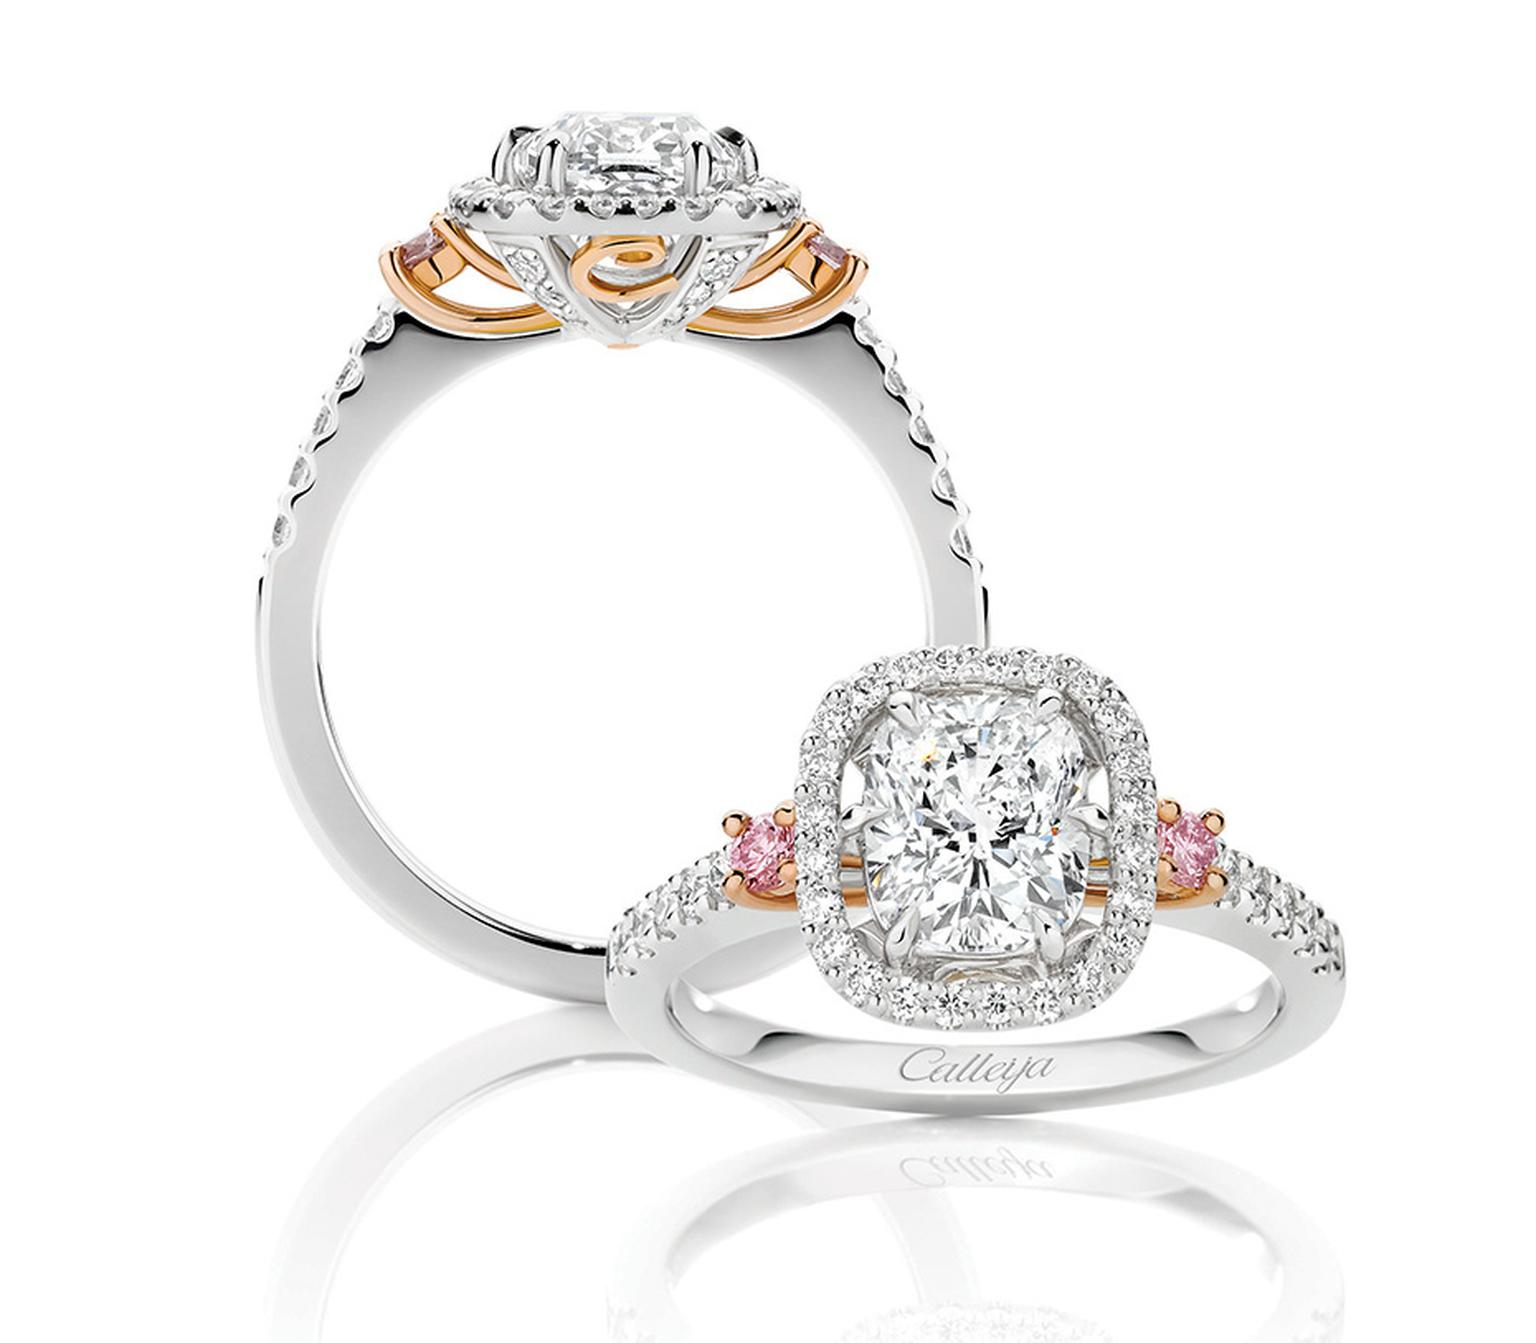 Calleija 1.50ct 'Glacier' diamond engagement ring, flanked by pink diamonds